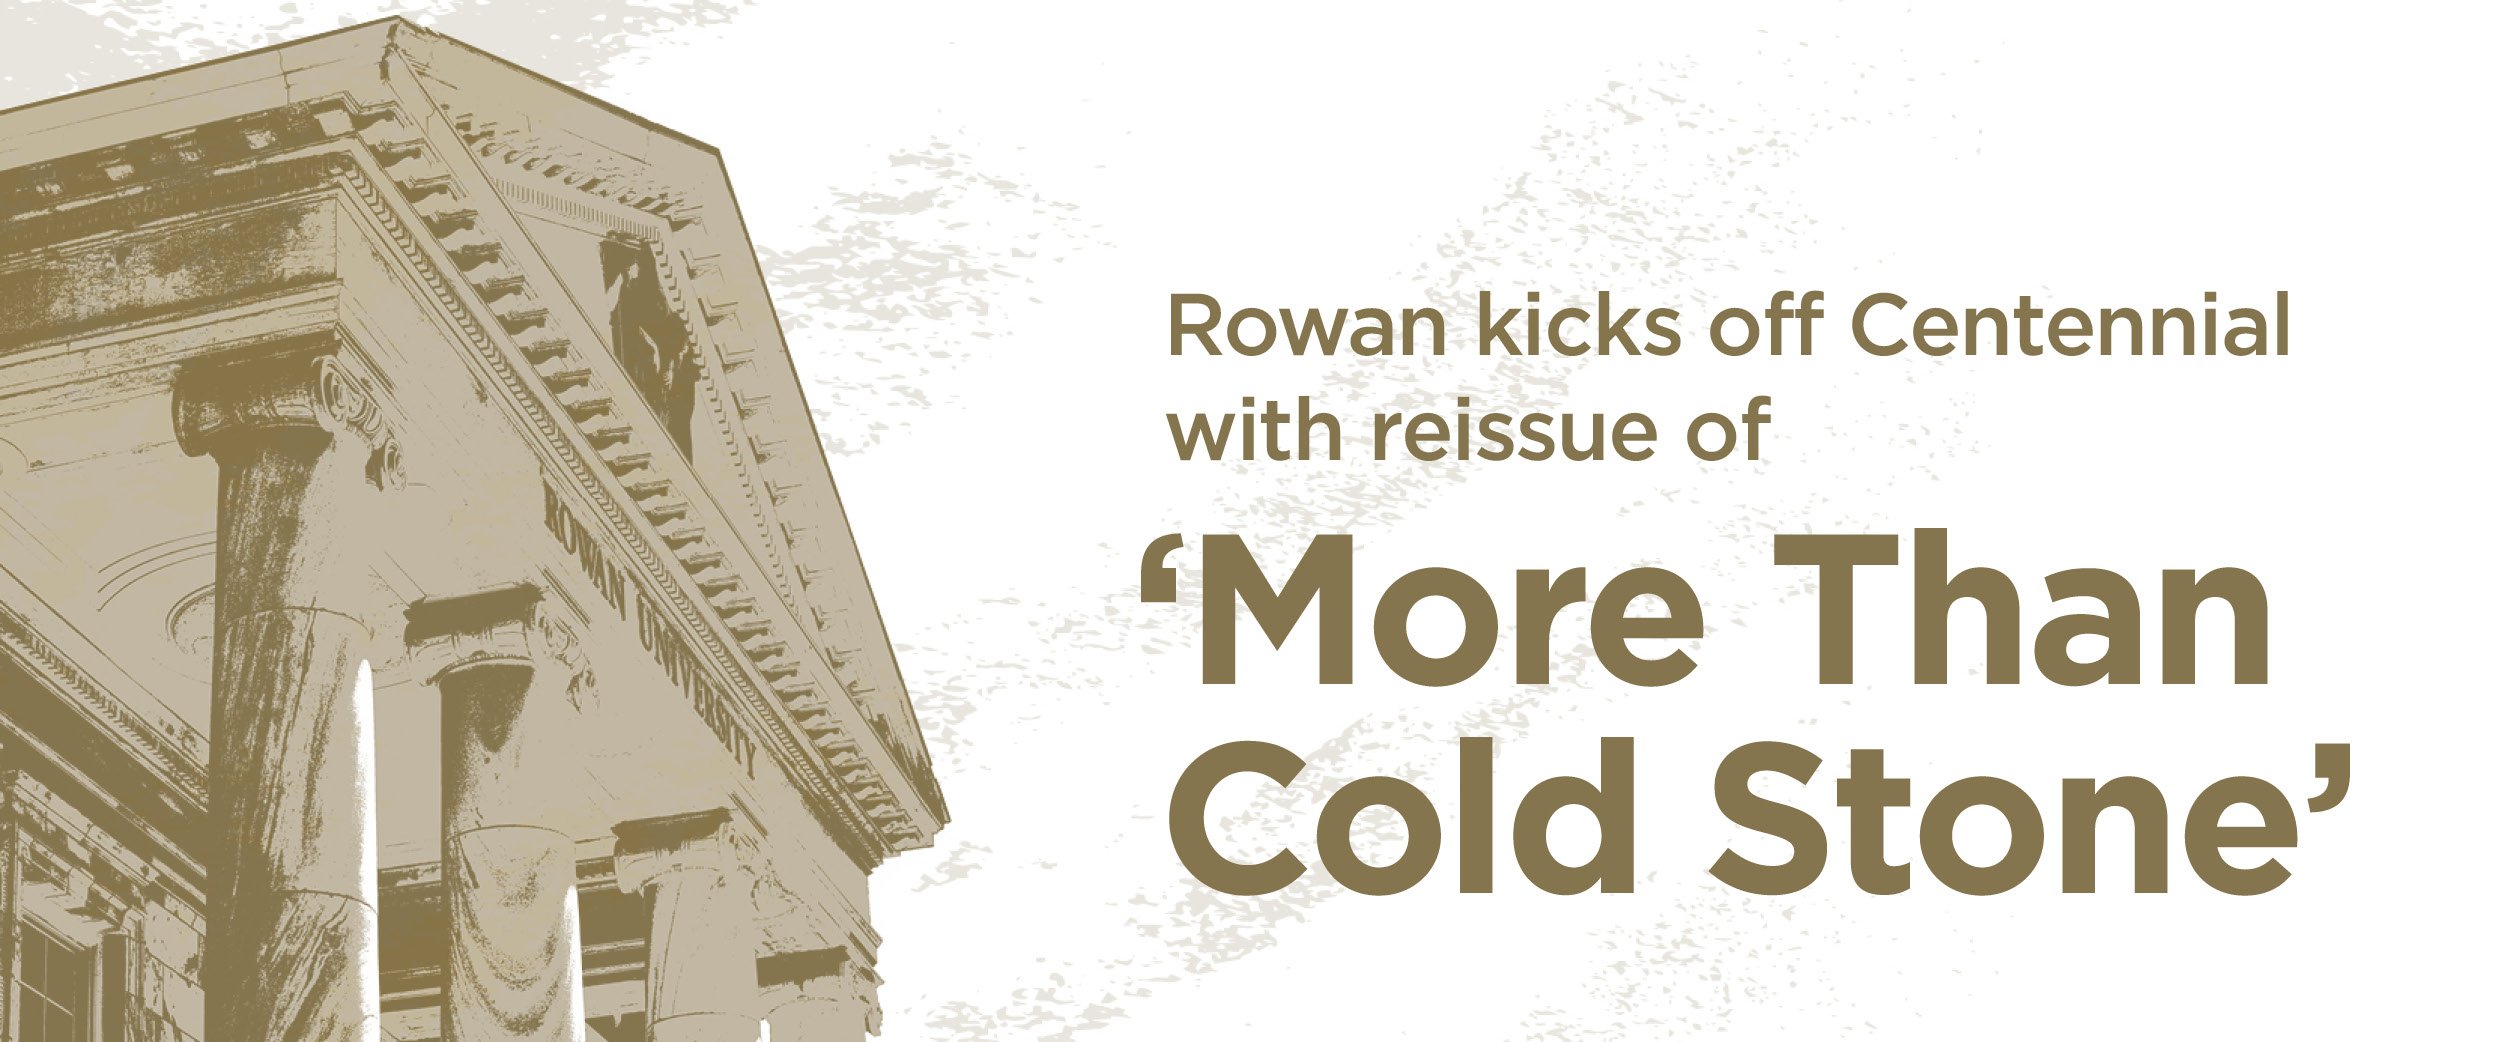 Rowan kicks off Centennial with reissue of ‘More Than Cold Stone’ 